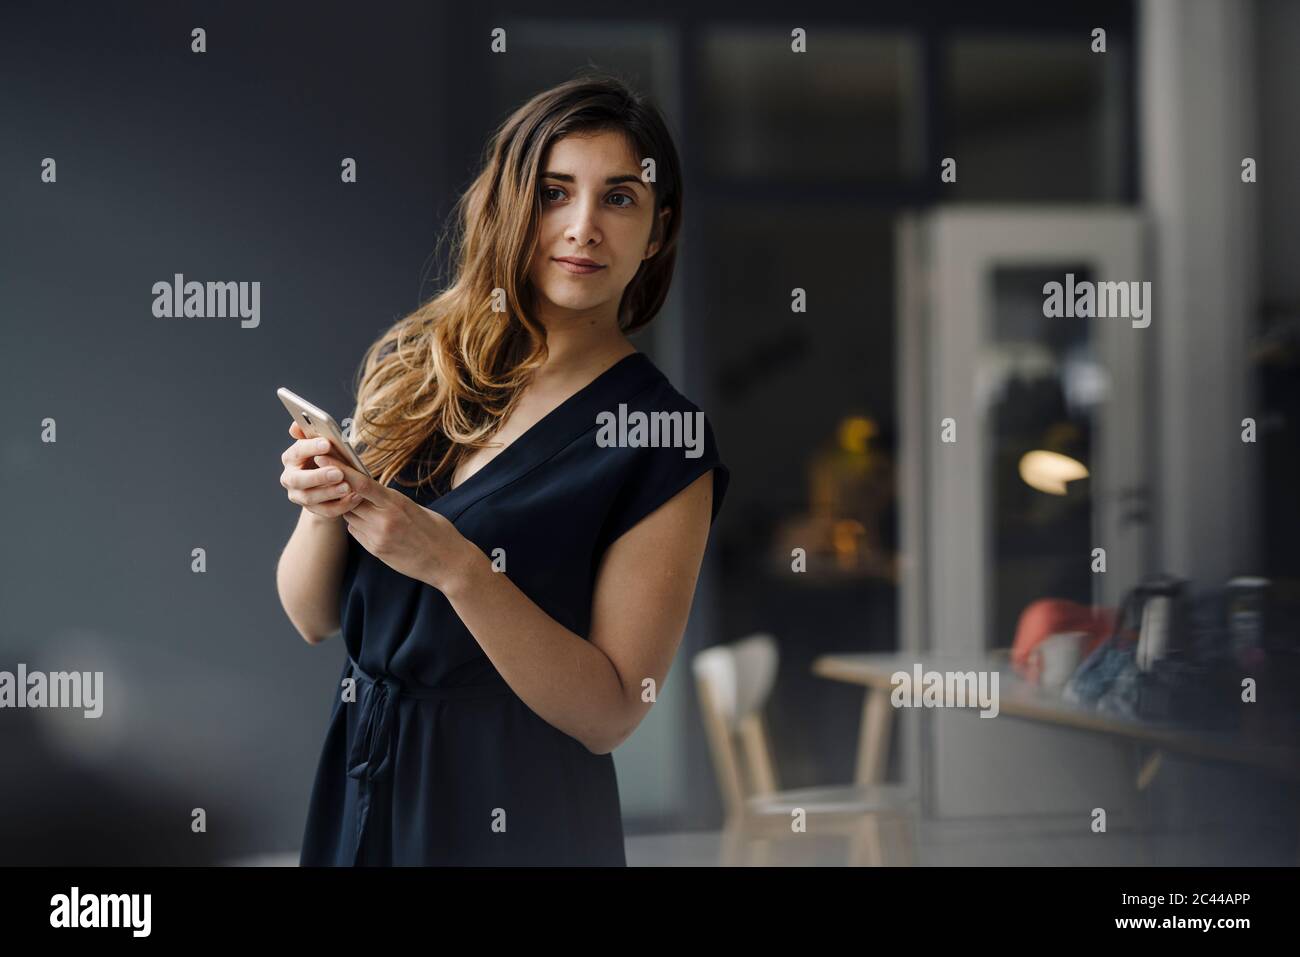 Portrait of young businesswoman with smartphone watching something Stock Photo